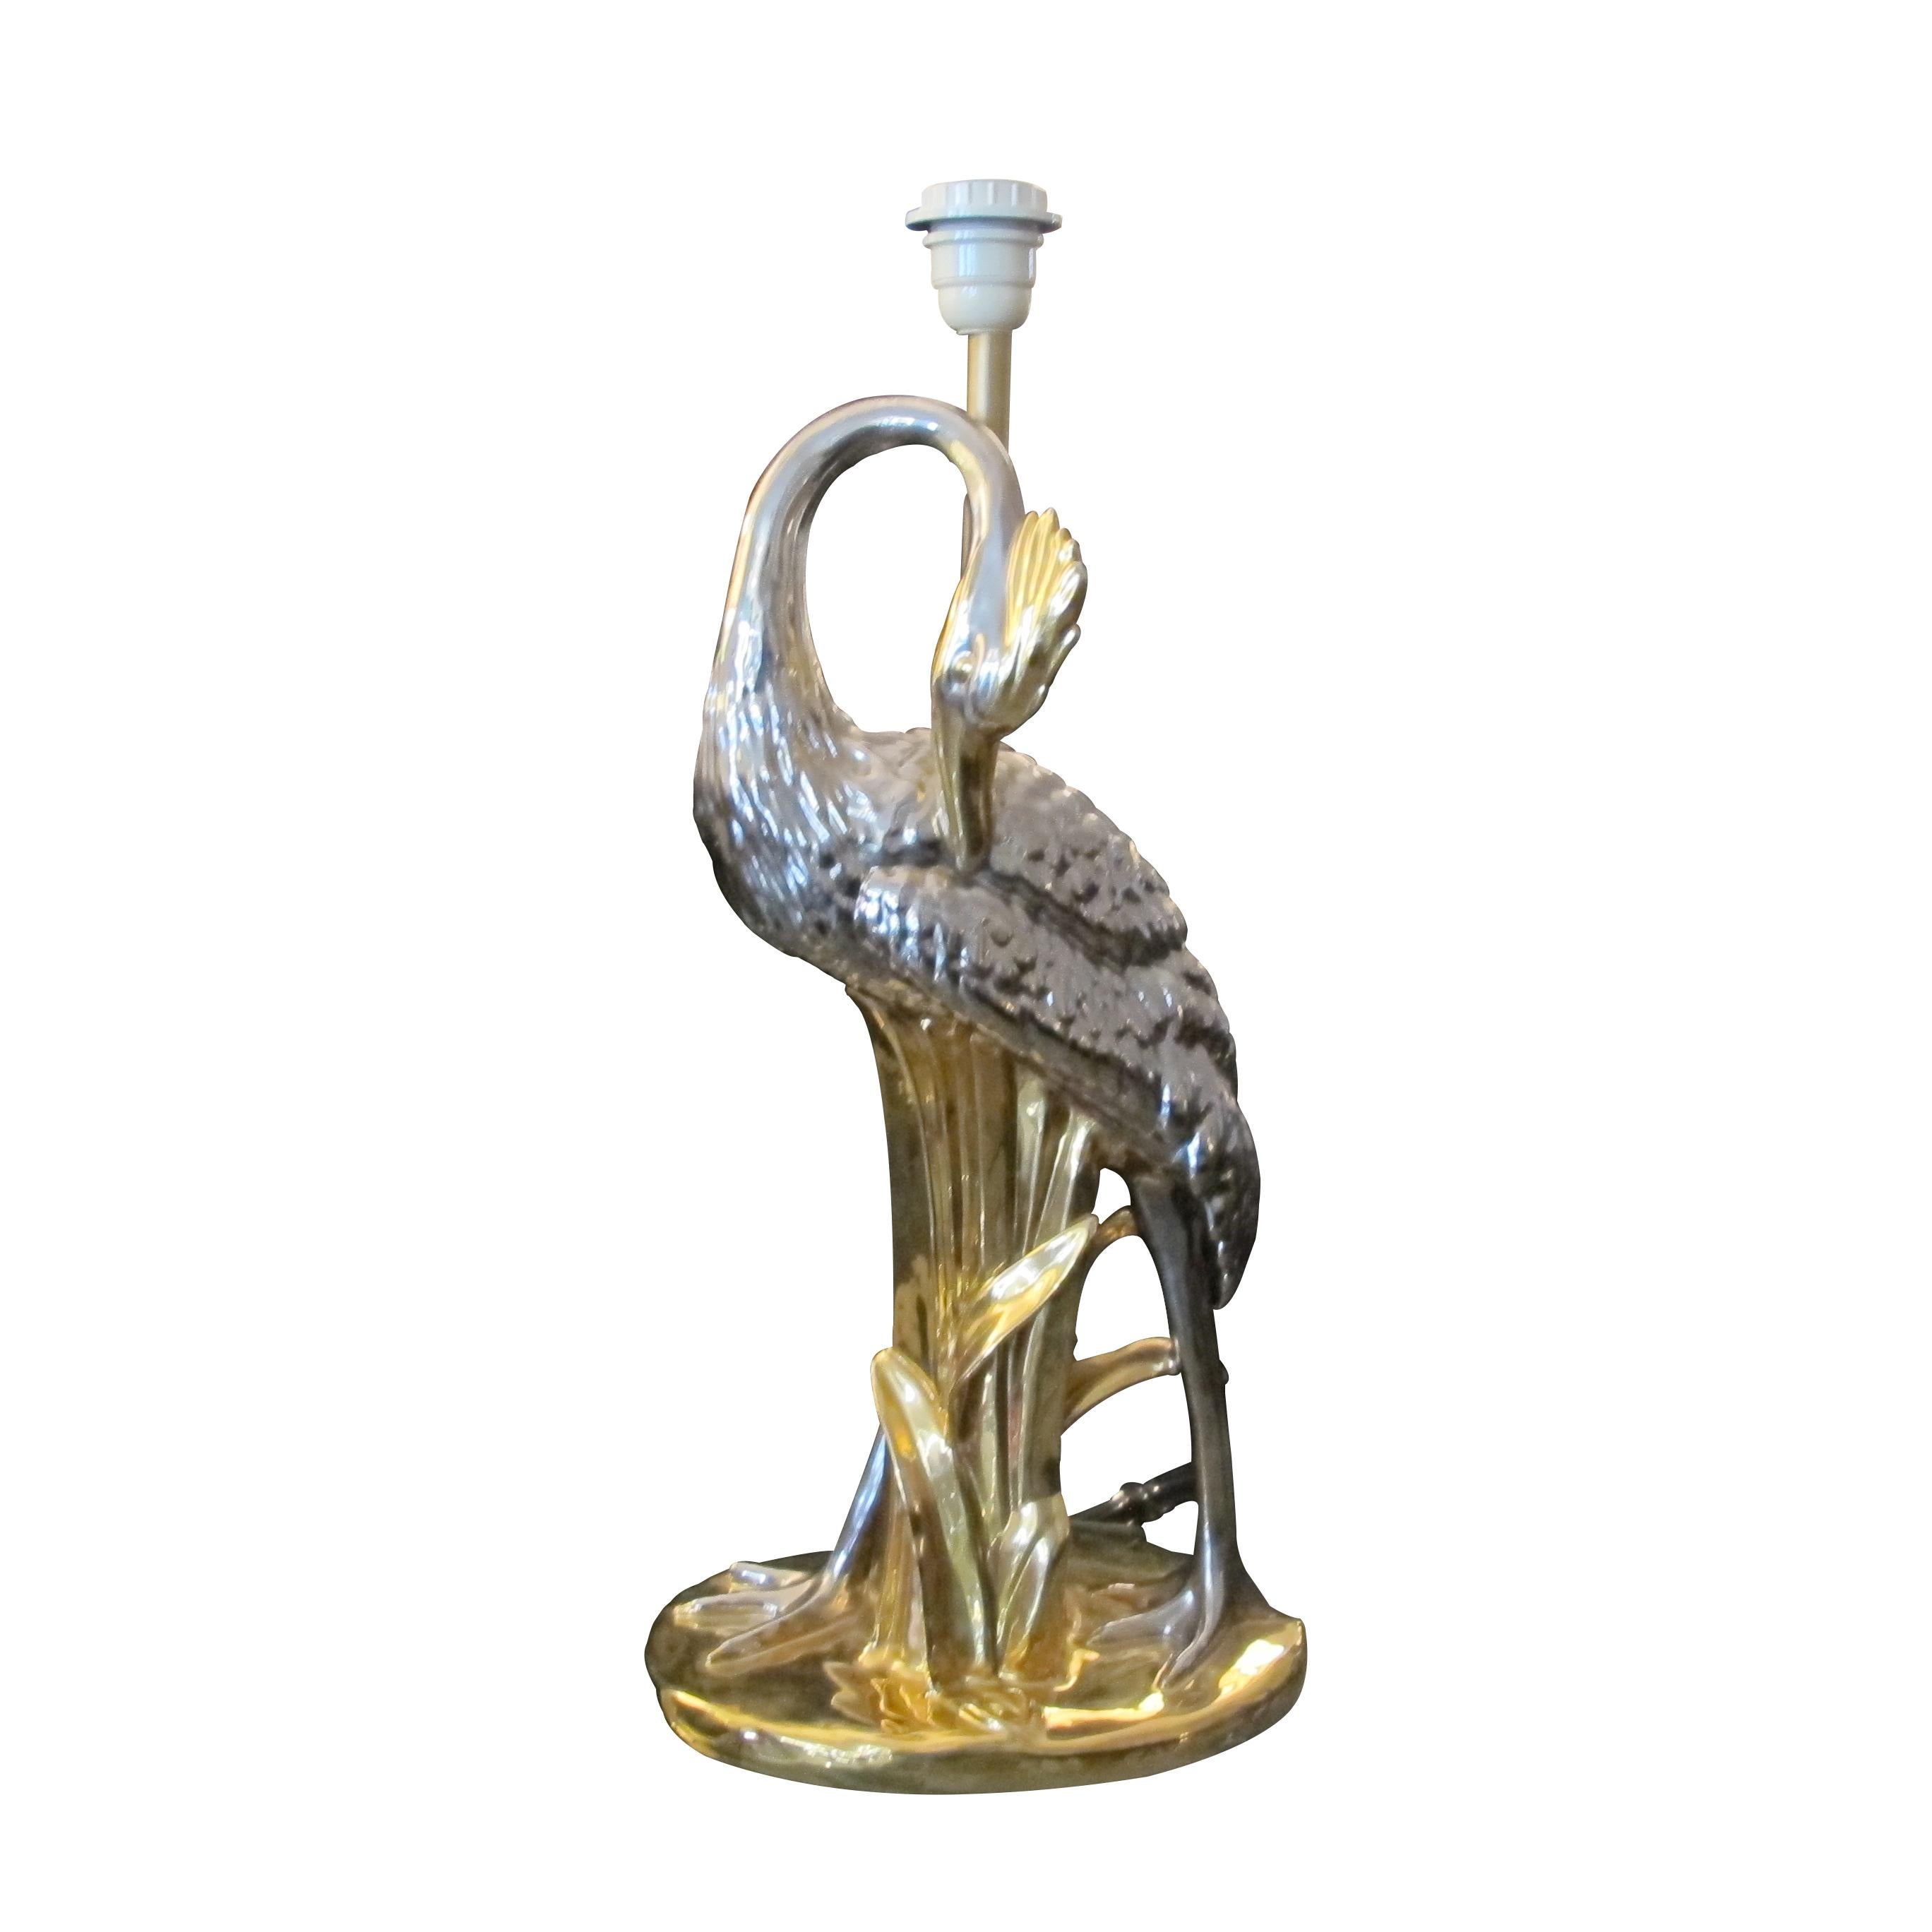 Highly decorative 1970s porcelain table lamp in the shape of a heron, gold and silver colour. The lamp was manufactured by San Marco in Italy. The lamp has been rewired to the UK standard. 

Size: H60 cm without the shade x W30 cm x D18 cm 
light